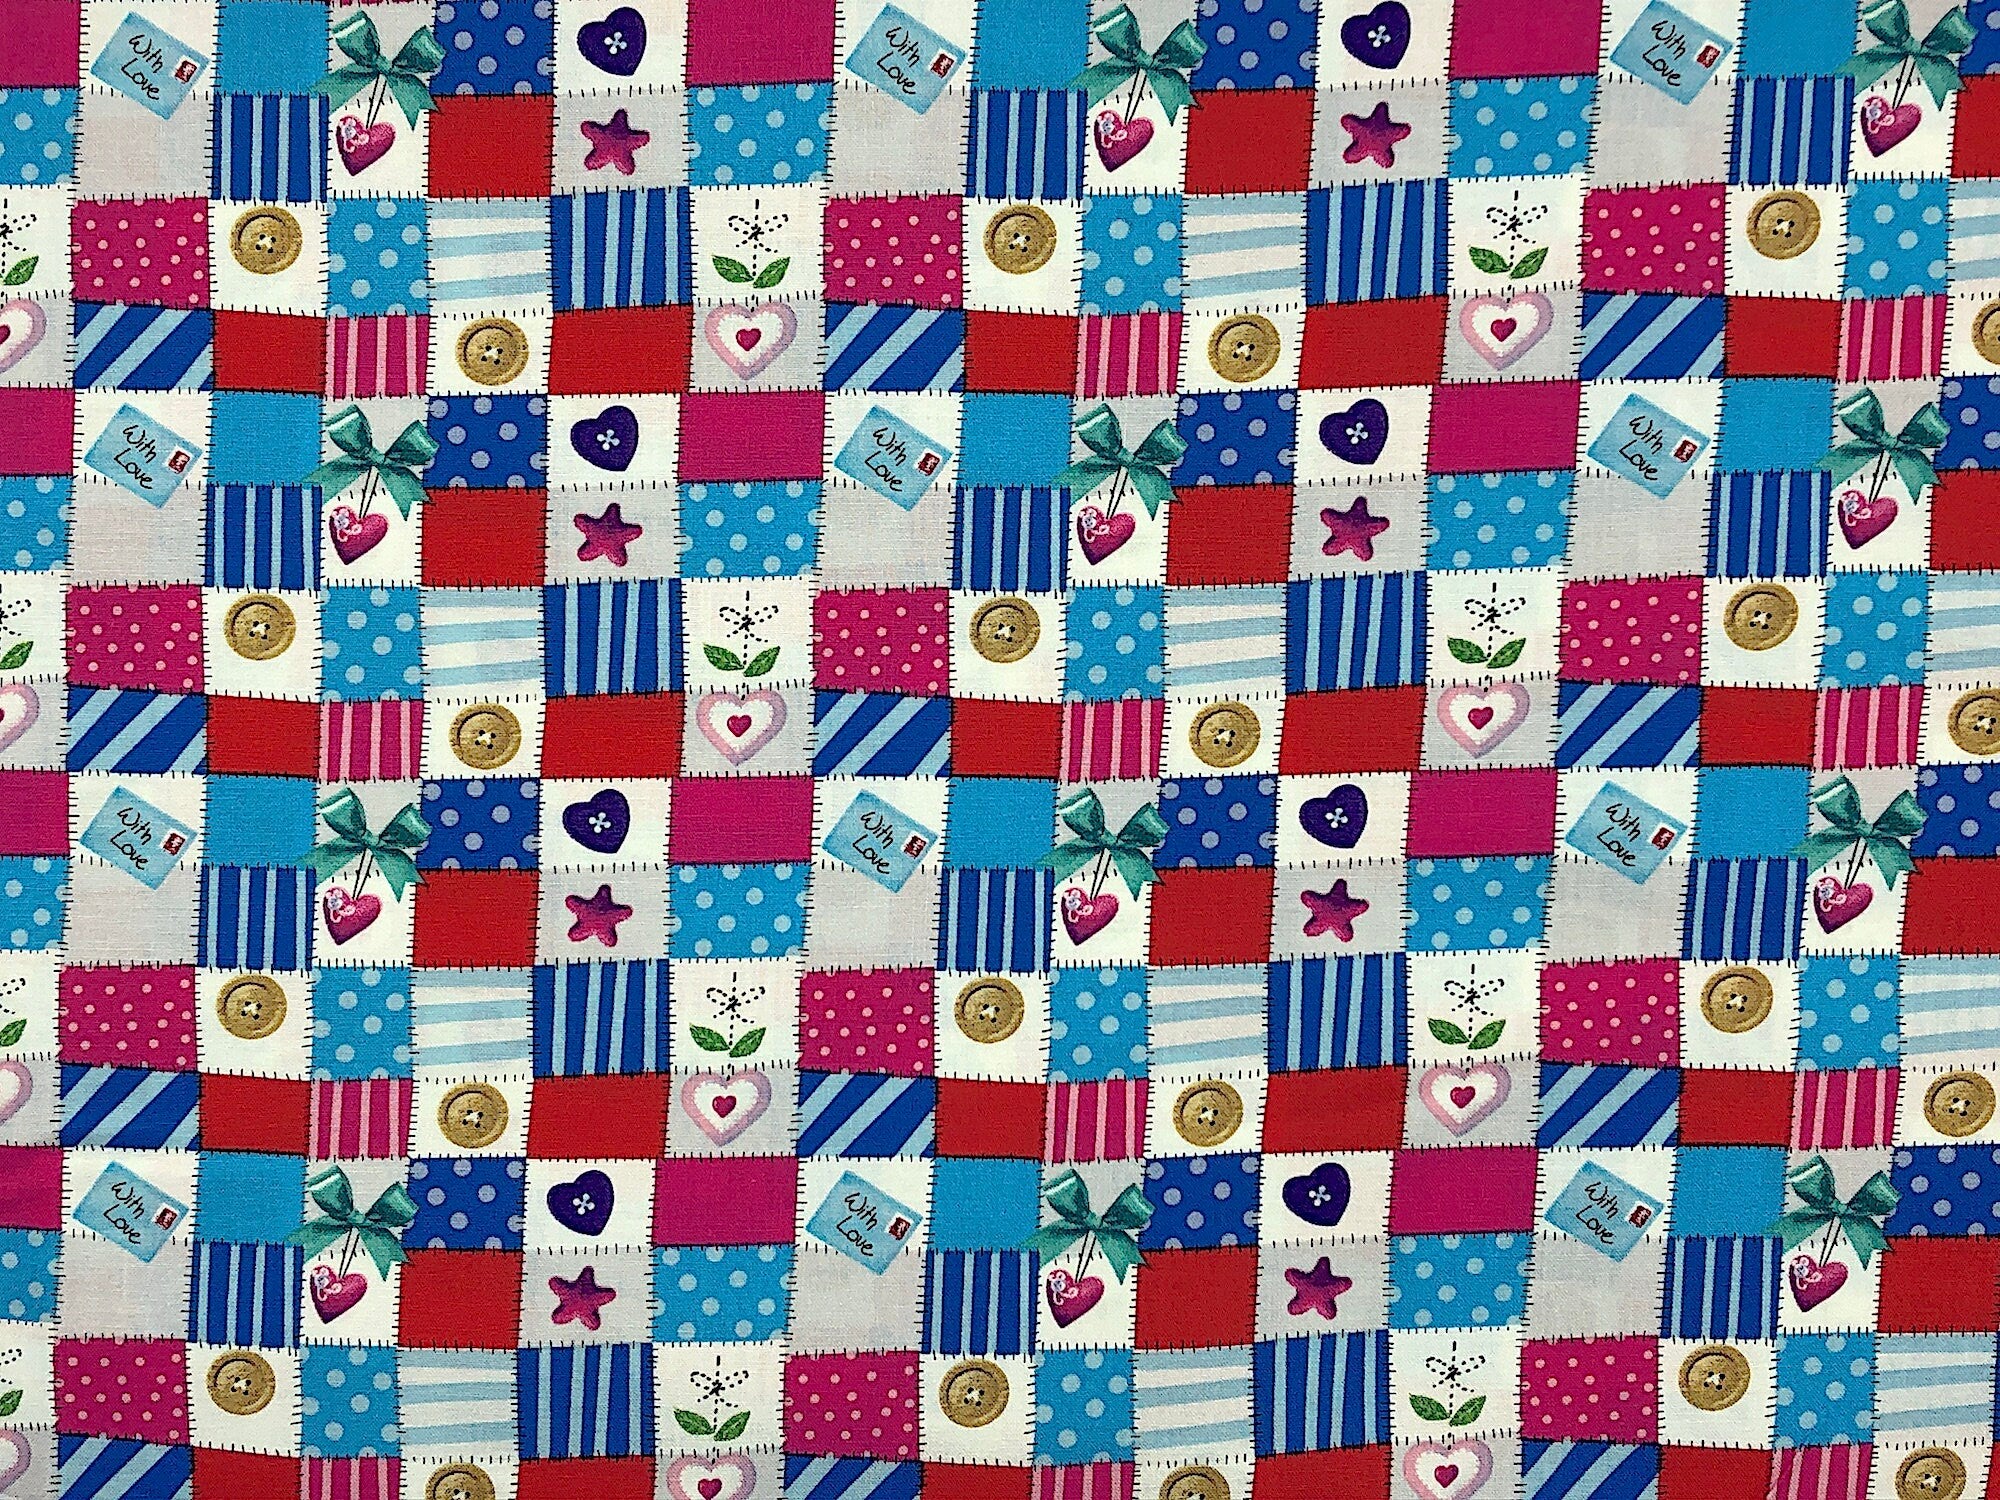 This fabric is called Mini Patchwork. It's covered with small squares of fabric that have been stitched together. Some of the patchwork squares have hearts, buttons or bows on them This fabric is part of the big hugs collection.